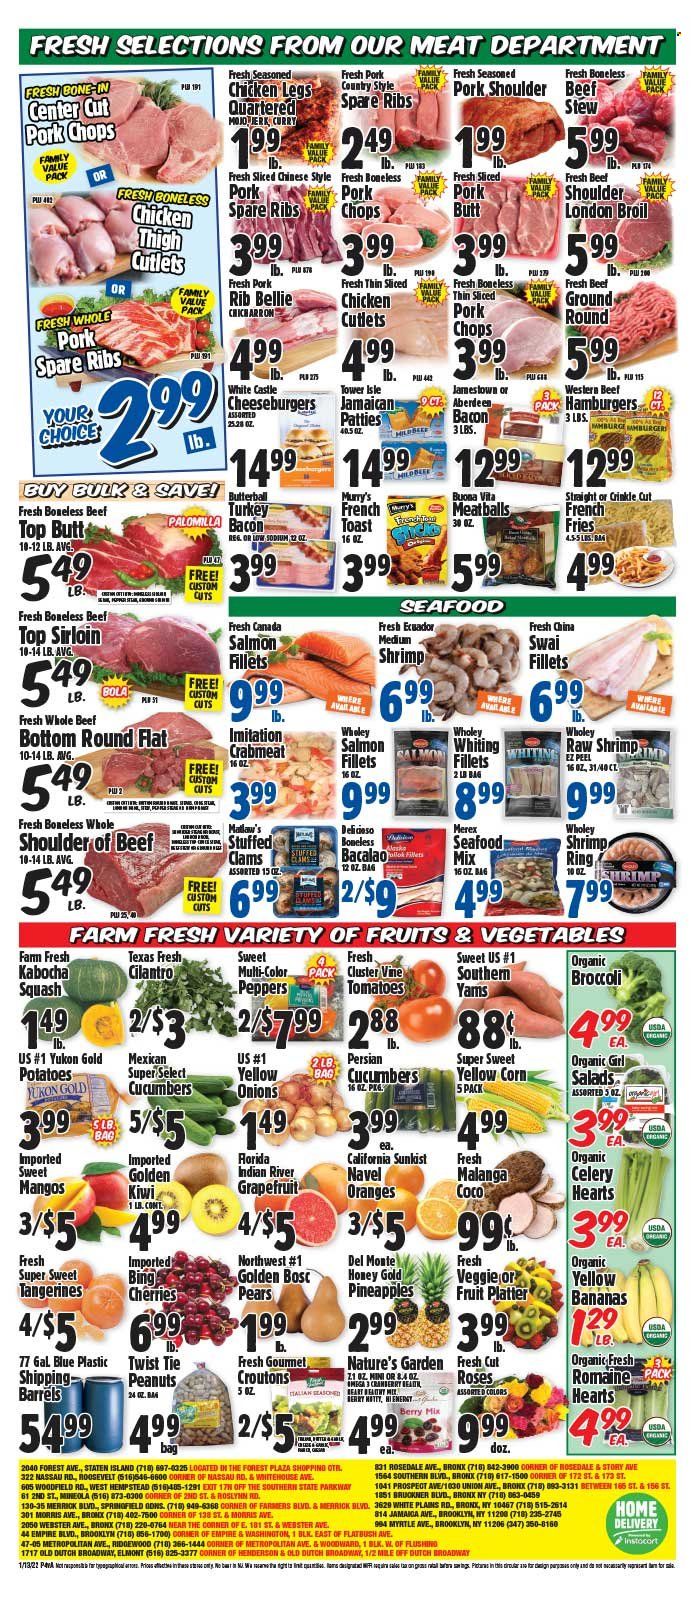 thumbnail - Western Beef Flyer - 01/13/2022 - 01/19/2022 - Sales products - broccoli, celery, cucumber, salad greens, tomatoes, potatoes, pumpkin, onion, salad, peppers, bananas, grapefruits, kiwi, mandarines, tangerines, pineapple, cherries, pears, oranges, Butterball, chicken legs, boneless chicken thighs, beef meat, ground beef, ribs, hamburger, pork chops, pork meat, pork ribs, pork shoulder, pork spare ribs, pork butt, clams, crab meat, fish fillets, salmon, salmon fillet, seafood, shrimps, whiting fillets, whiting, swai fillet, meatballs, cheeseburger, ready meal, french toast, bacon, potato fries, french fries, croutons, Del Monte, canned sweet potatoes, cilantro, peanuts, Bai, antioxidant drink, beer, Omega-3. Page 4.